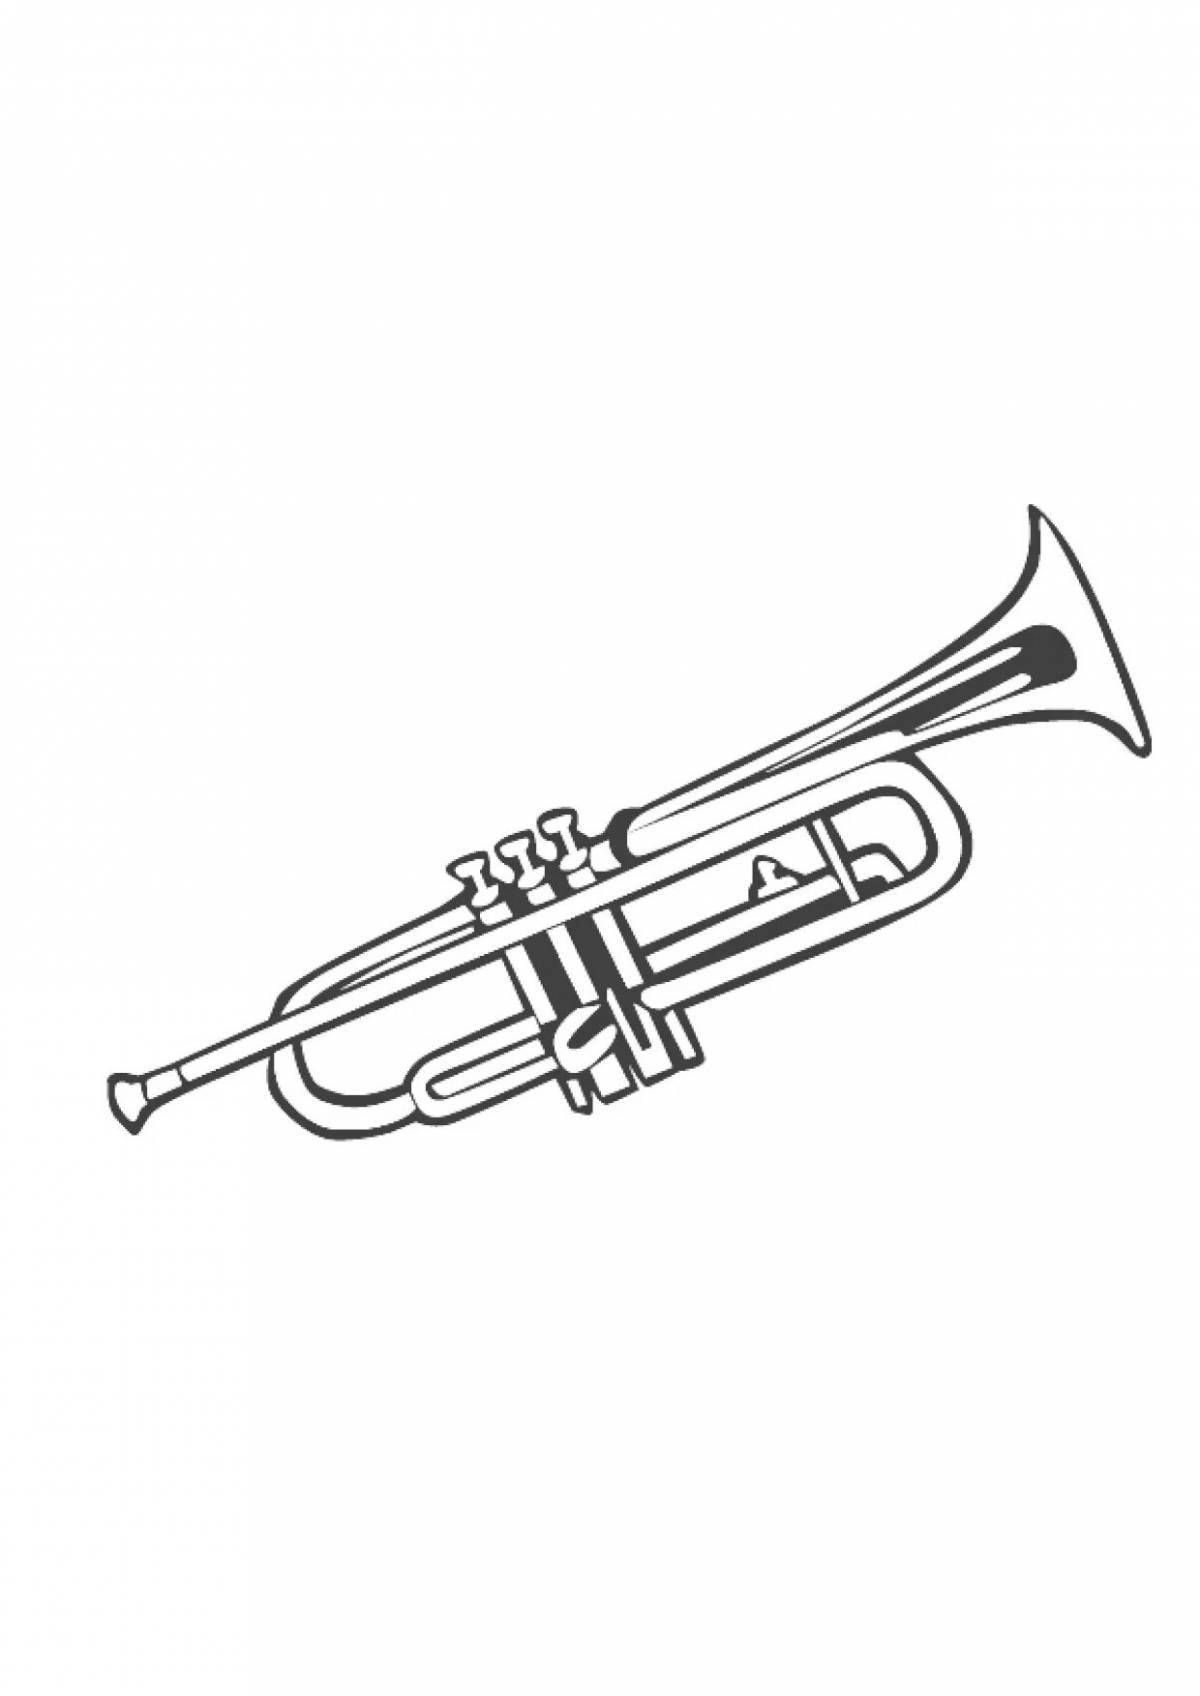 Amazing trumpet coloring page for kids